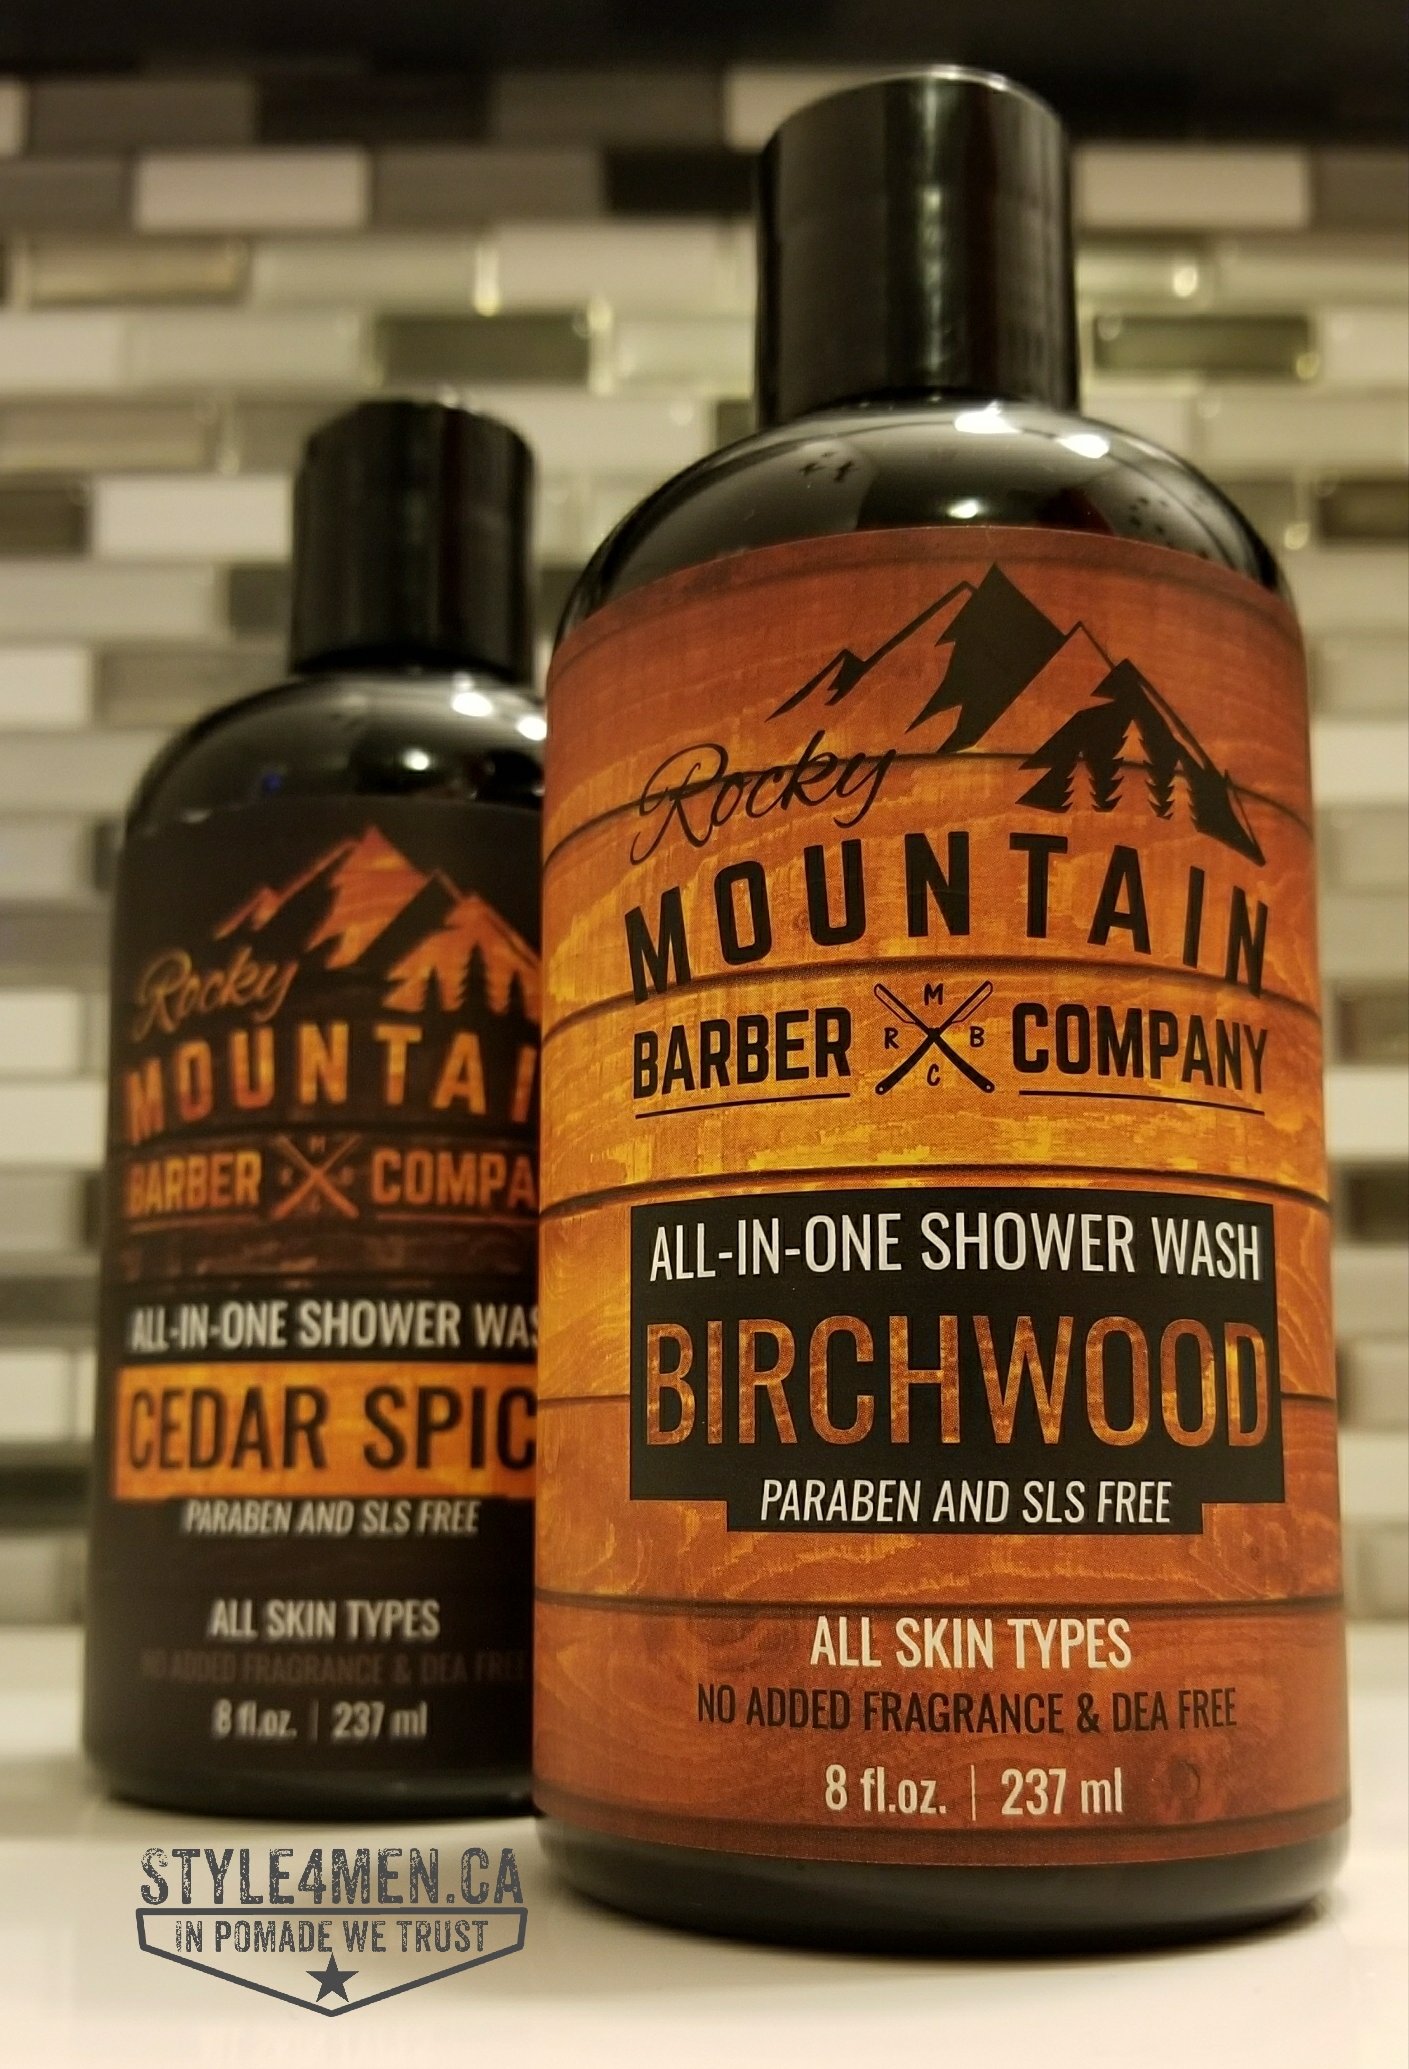 All-In-One Shower Wash from the Rocky Mountain Barber Co.